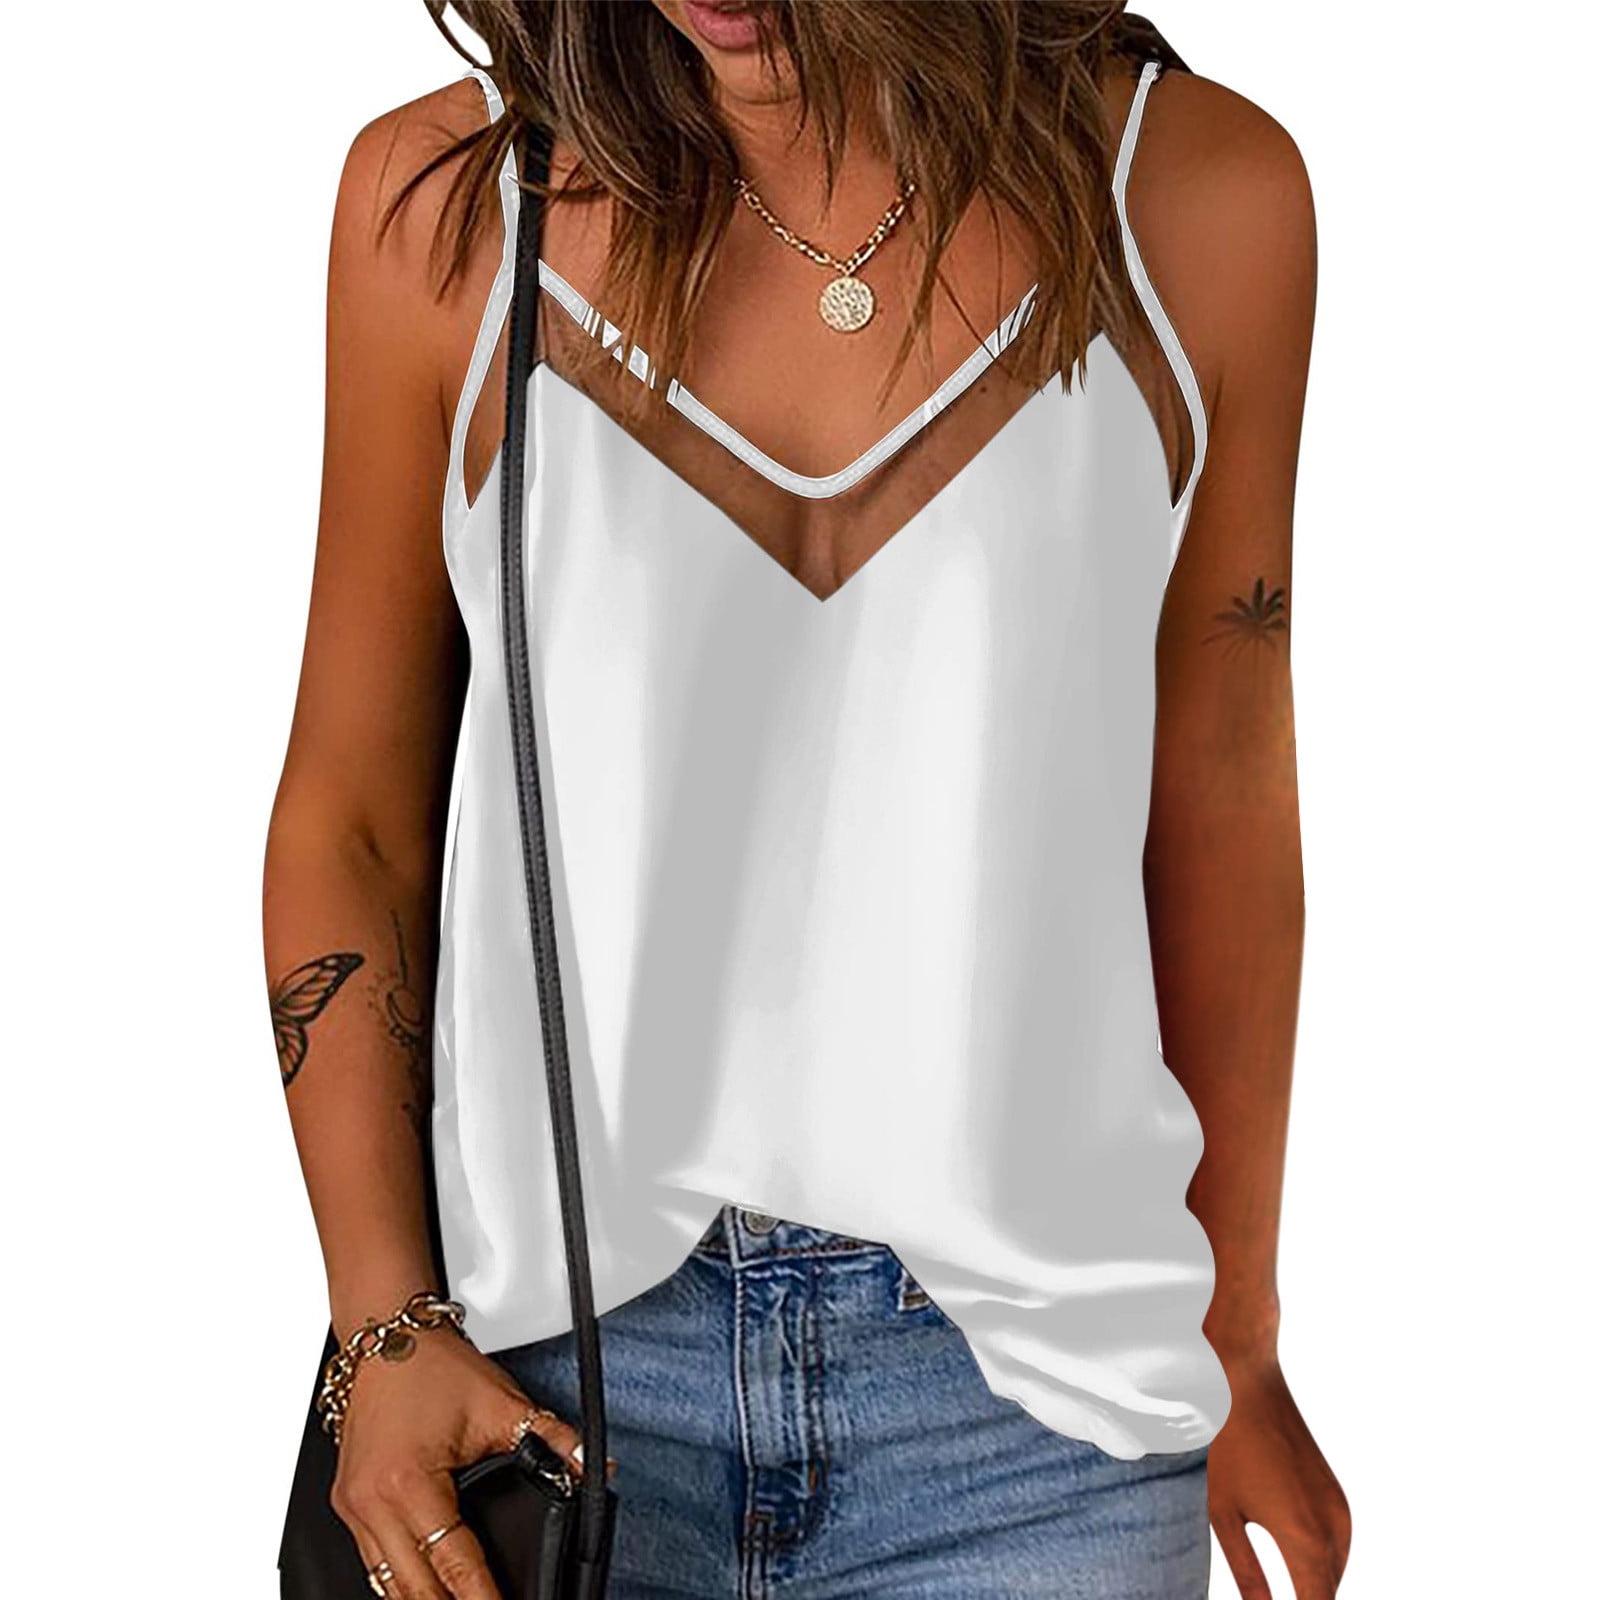 Outfmvch Womens Tops Tank Top For Women Fashion Women Sleeveless Vest  Ladies Solid Camis Slim Short Tank Tops Corset Tops For Women White XL